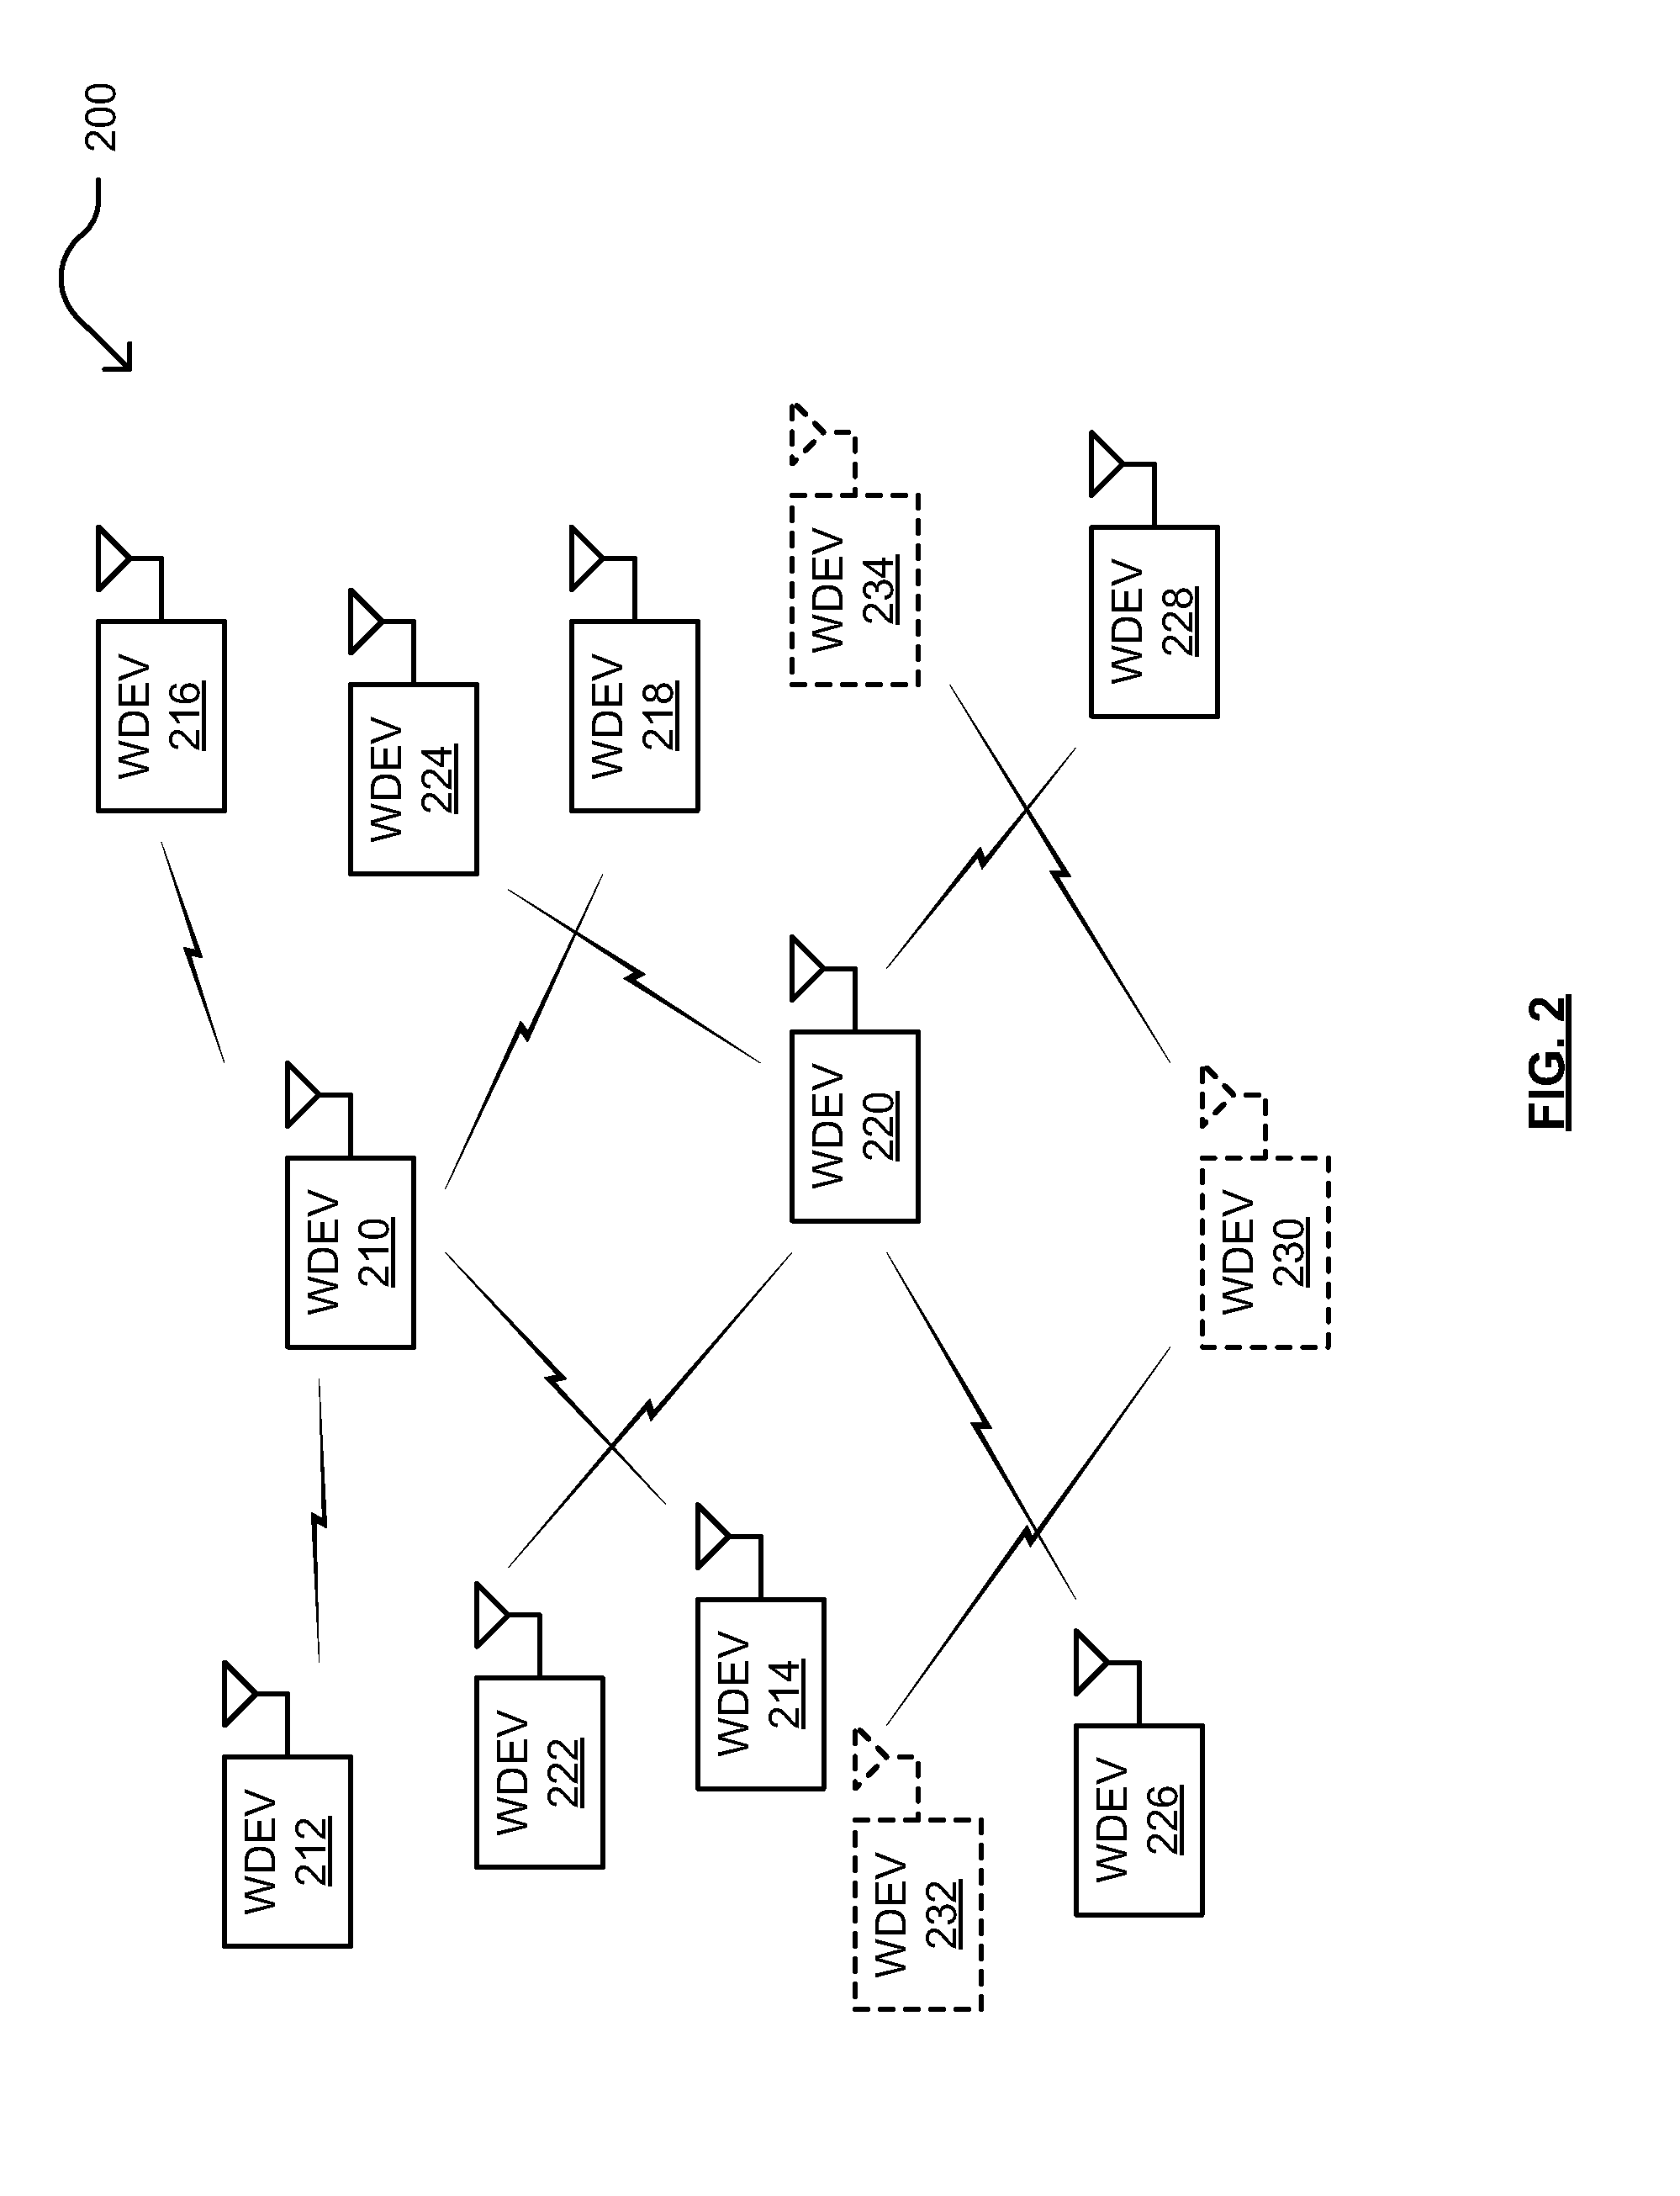 Multiple narrow bandwidth channel access and MAC operation within wireless communications